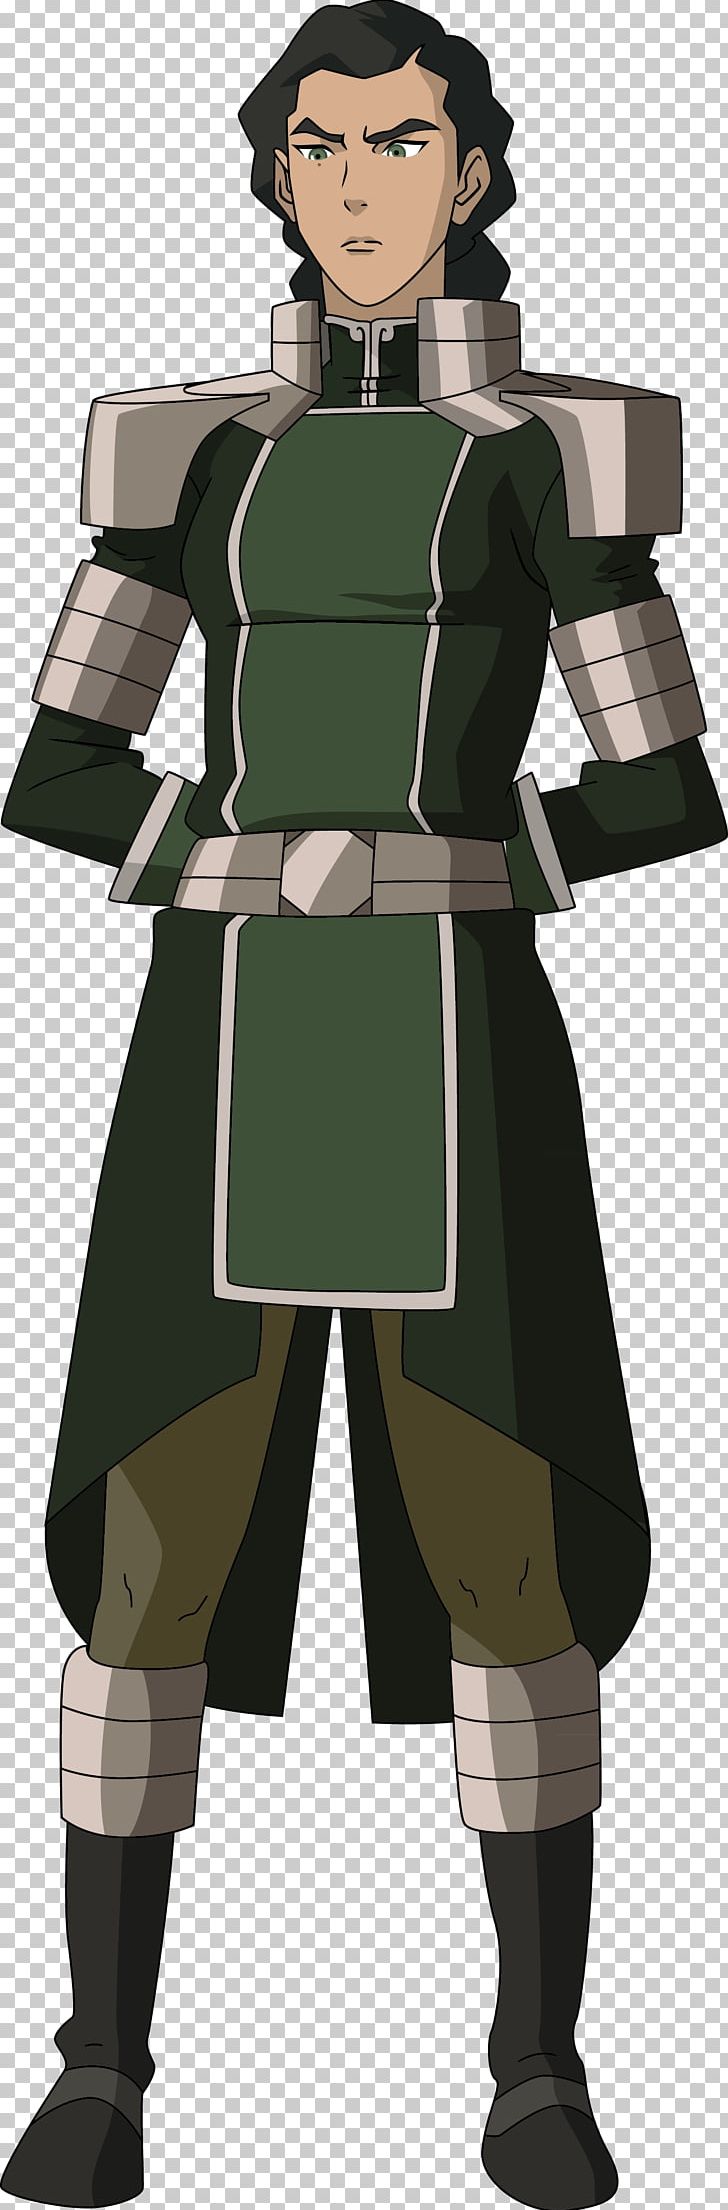 Kuvira The Legend Of Korra Asami Sato Toph Beifong PNG, Clipart, Aang, Armour, Avatar, Avatar The Last Airbender, Cartoon Free PNG Download